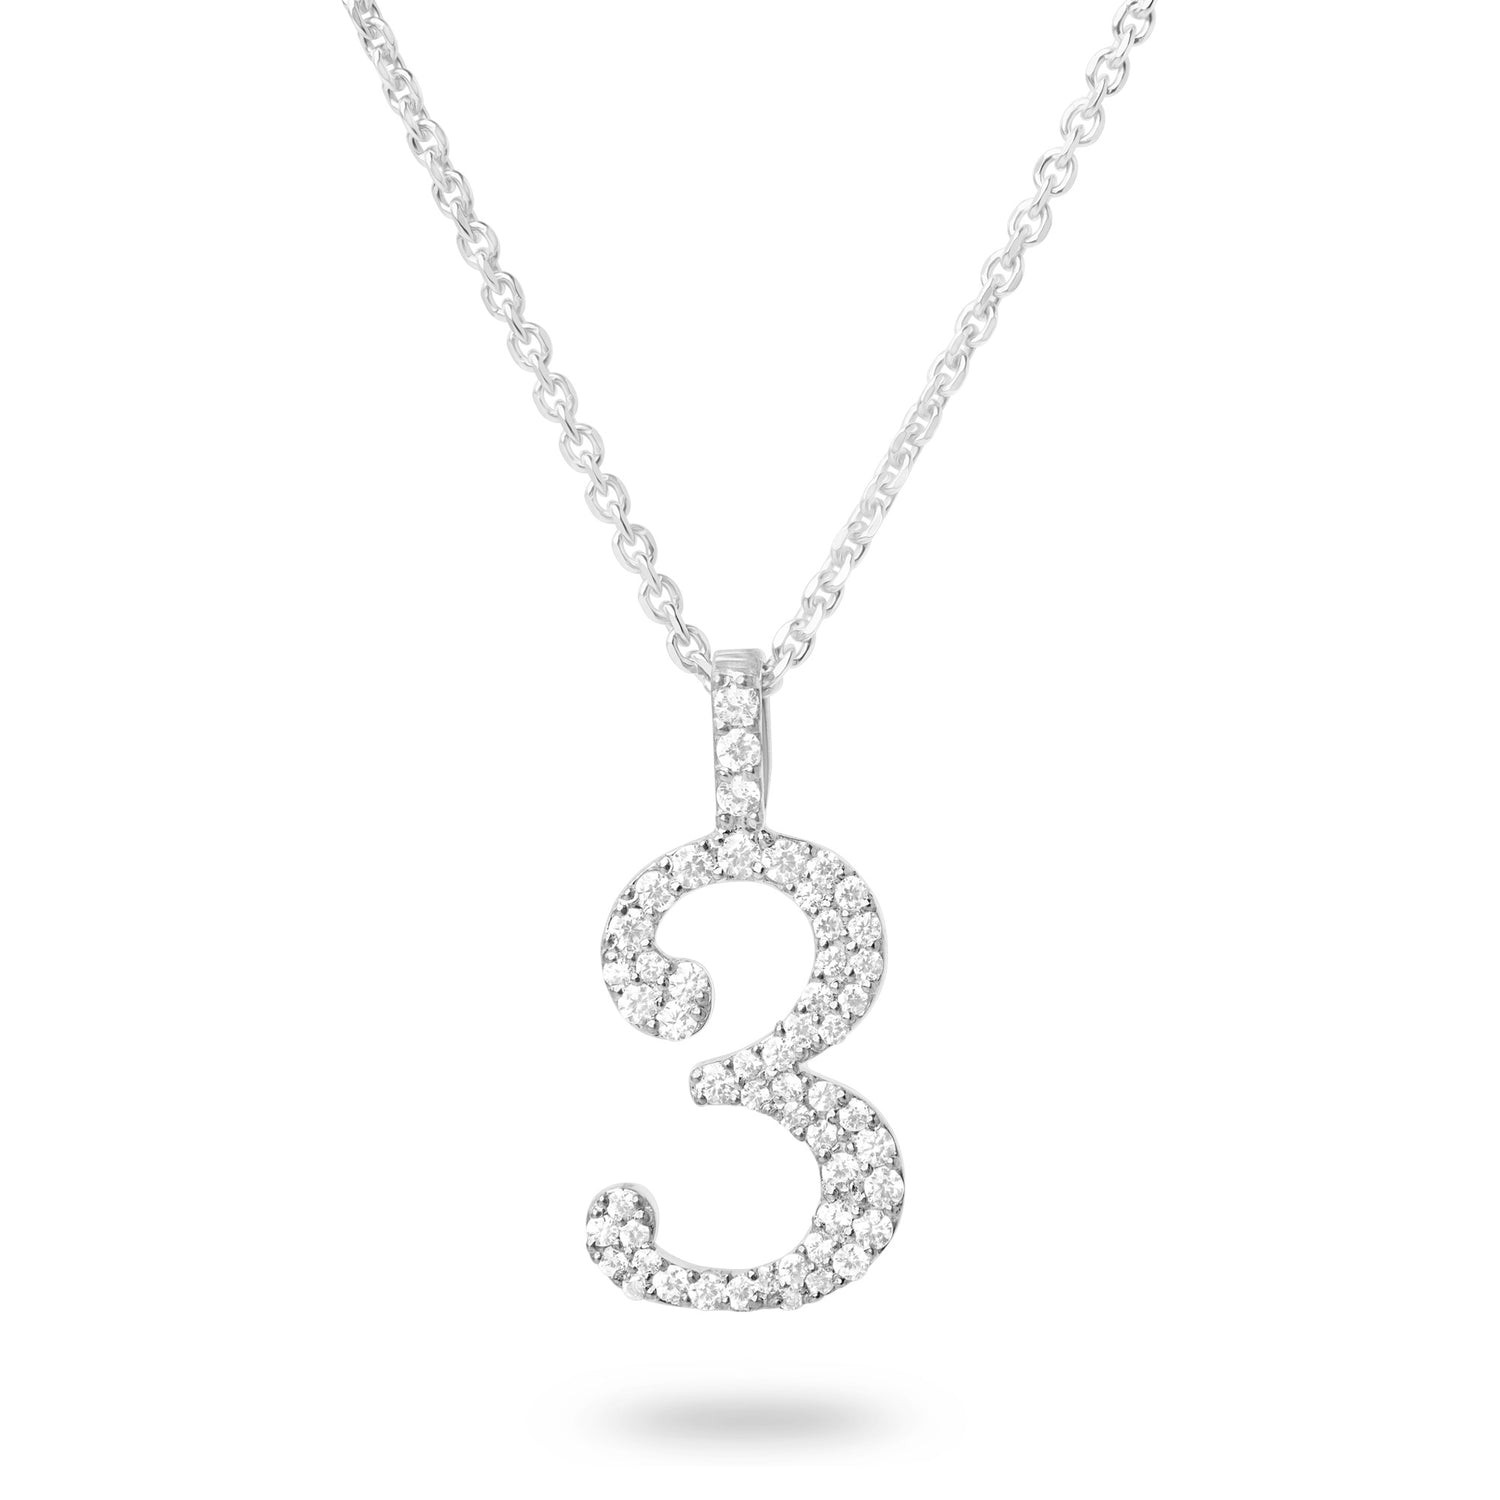 1 Pc Stainless Steel Twist Chain 3 Number Pendant Necklace for Women Men |  SHEIN USA